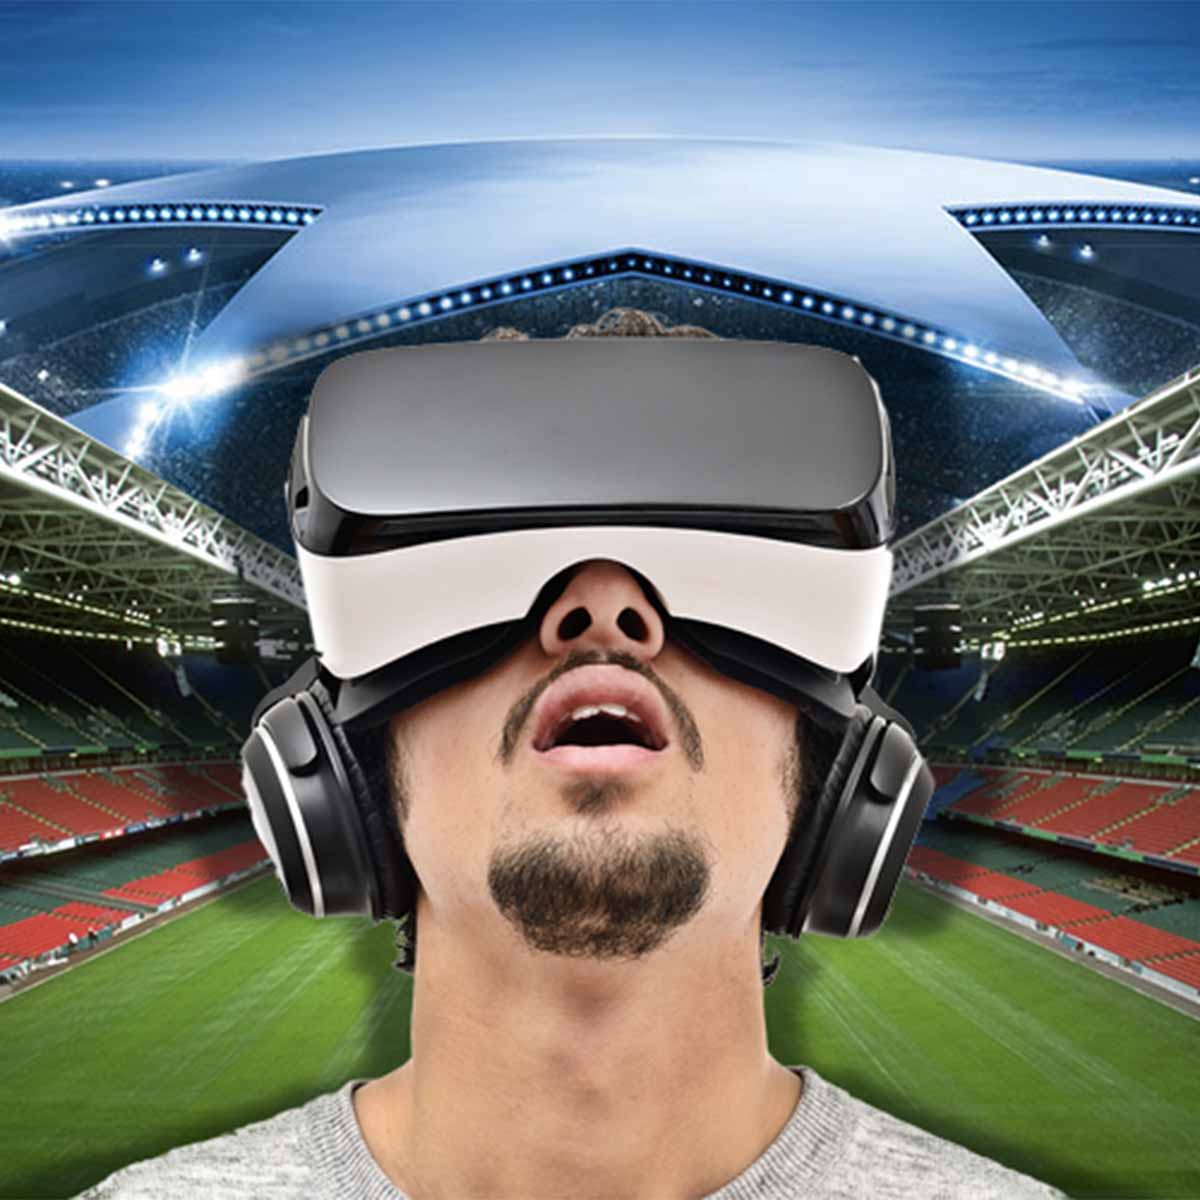 Is the near future of events in VR? Aggregating in the era of Covid-19